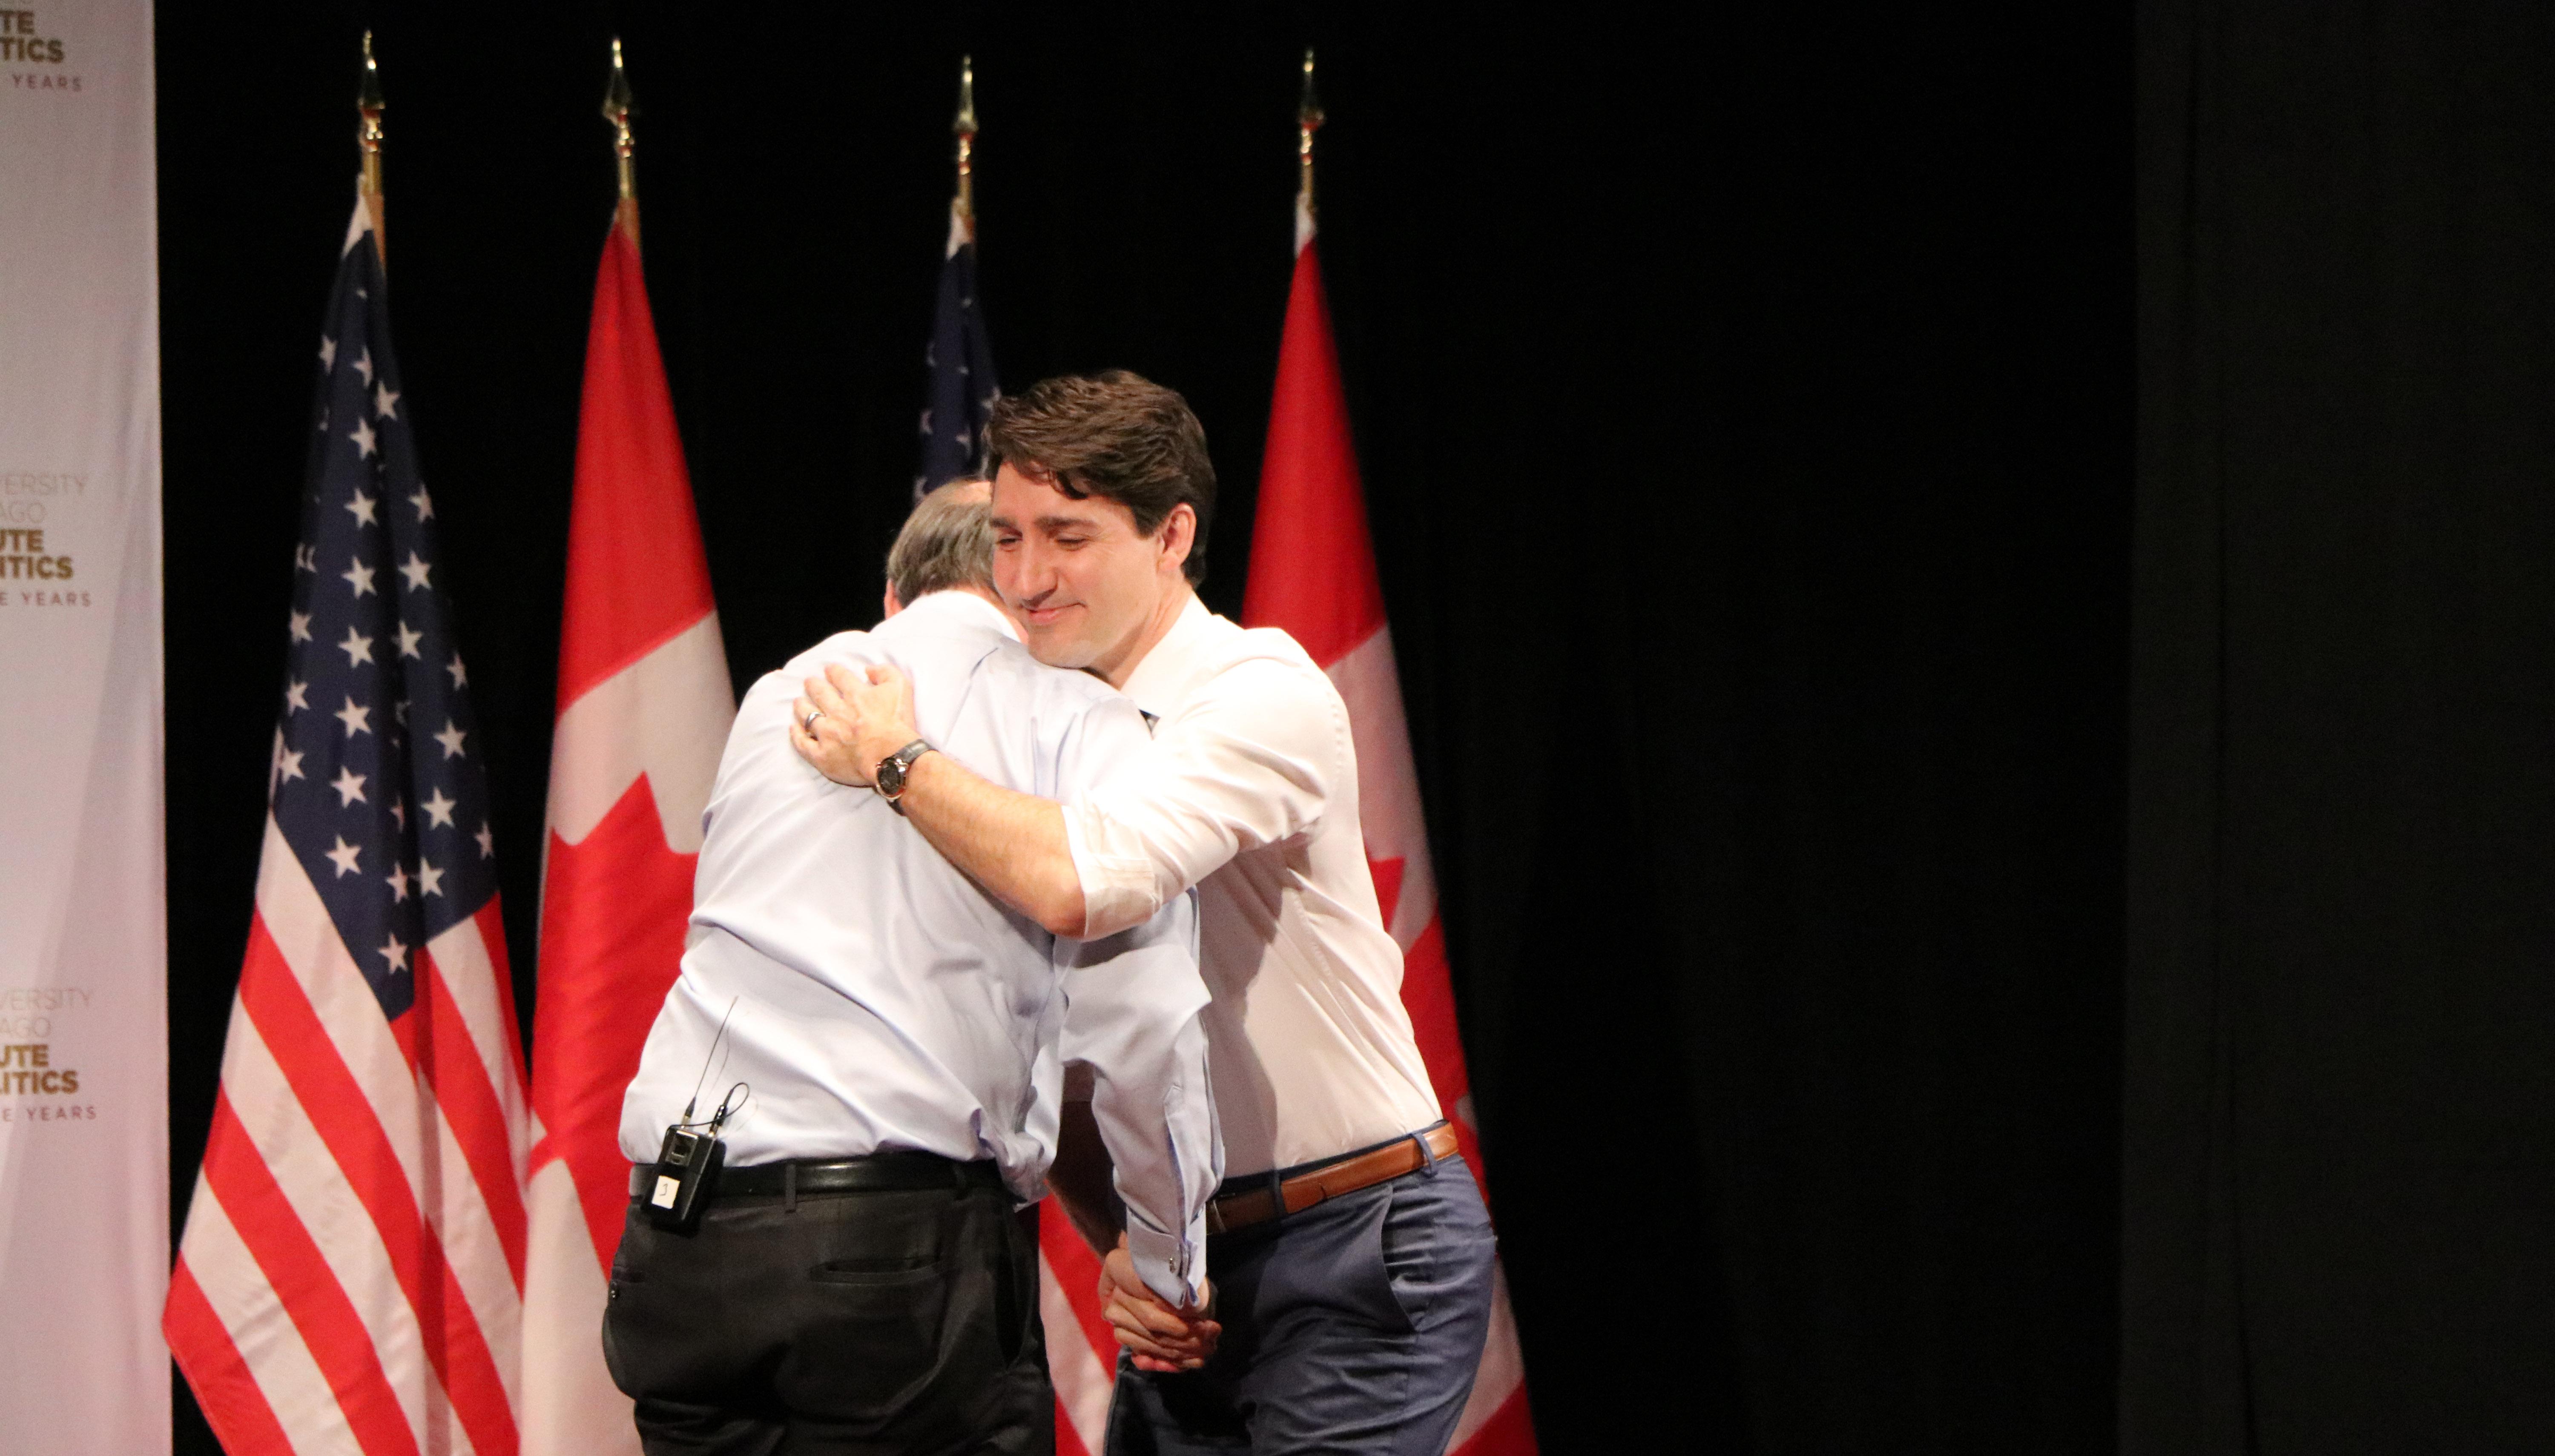 Axelrod and Trudeau hug at the end of the question and answer session. (Evan Garcia / Chicago Tonight)